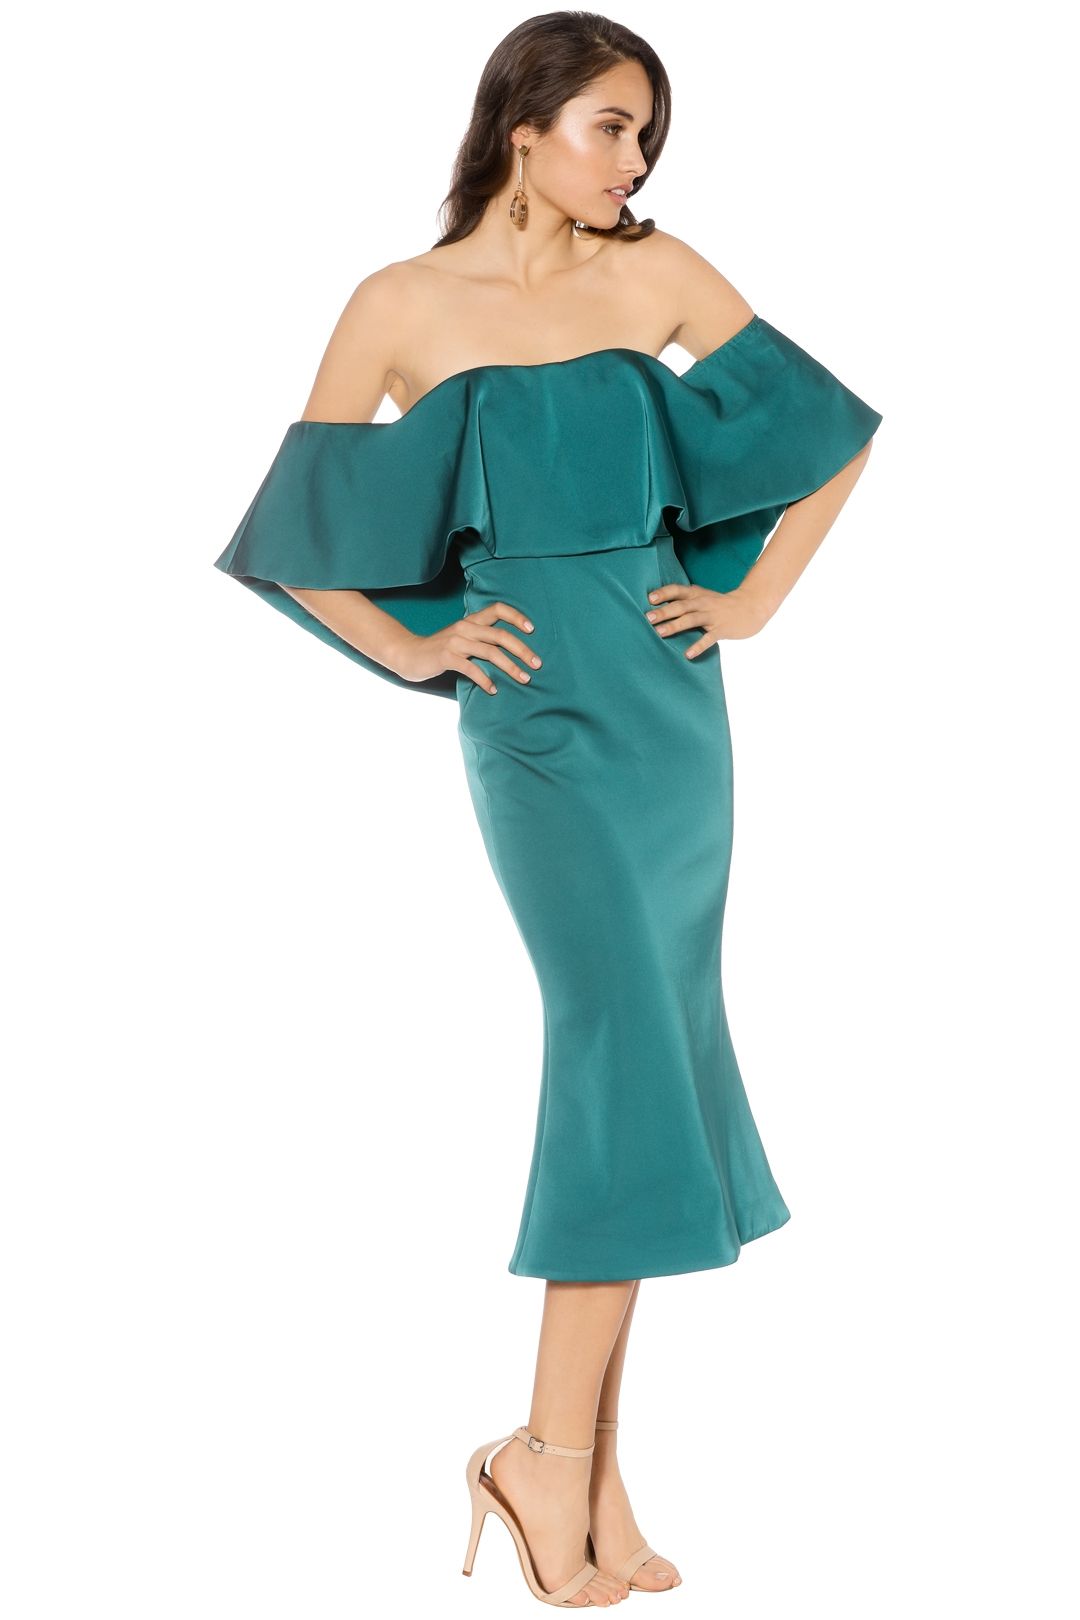 Talulah - Without You Midi - Emerald - Side - Teal